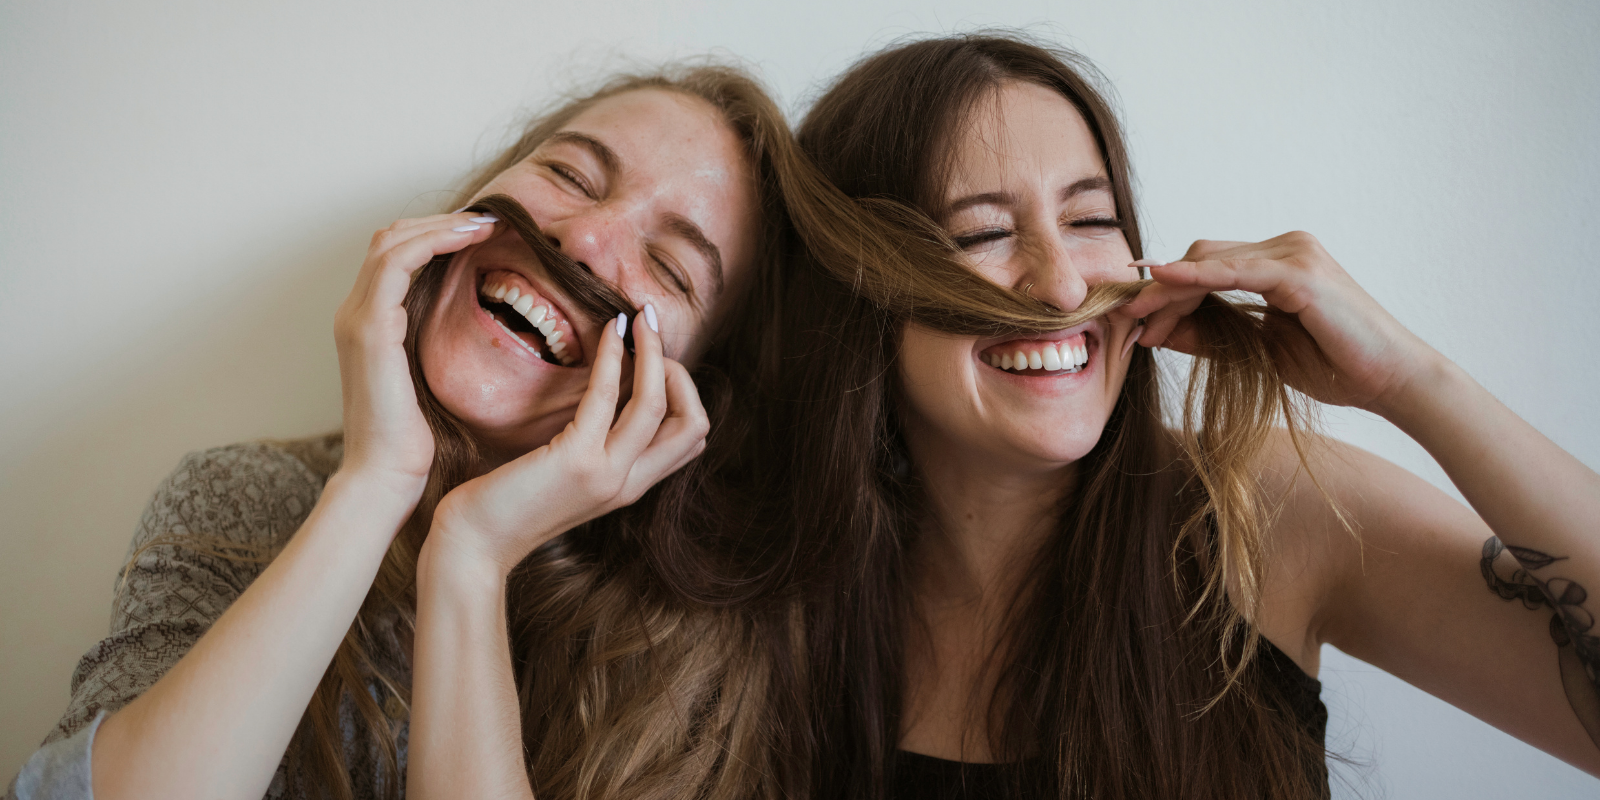 Two girls laughing, they are playing around with hair to make mustaches